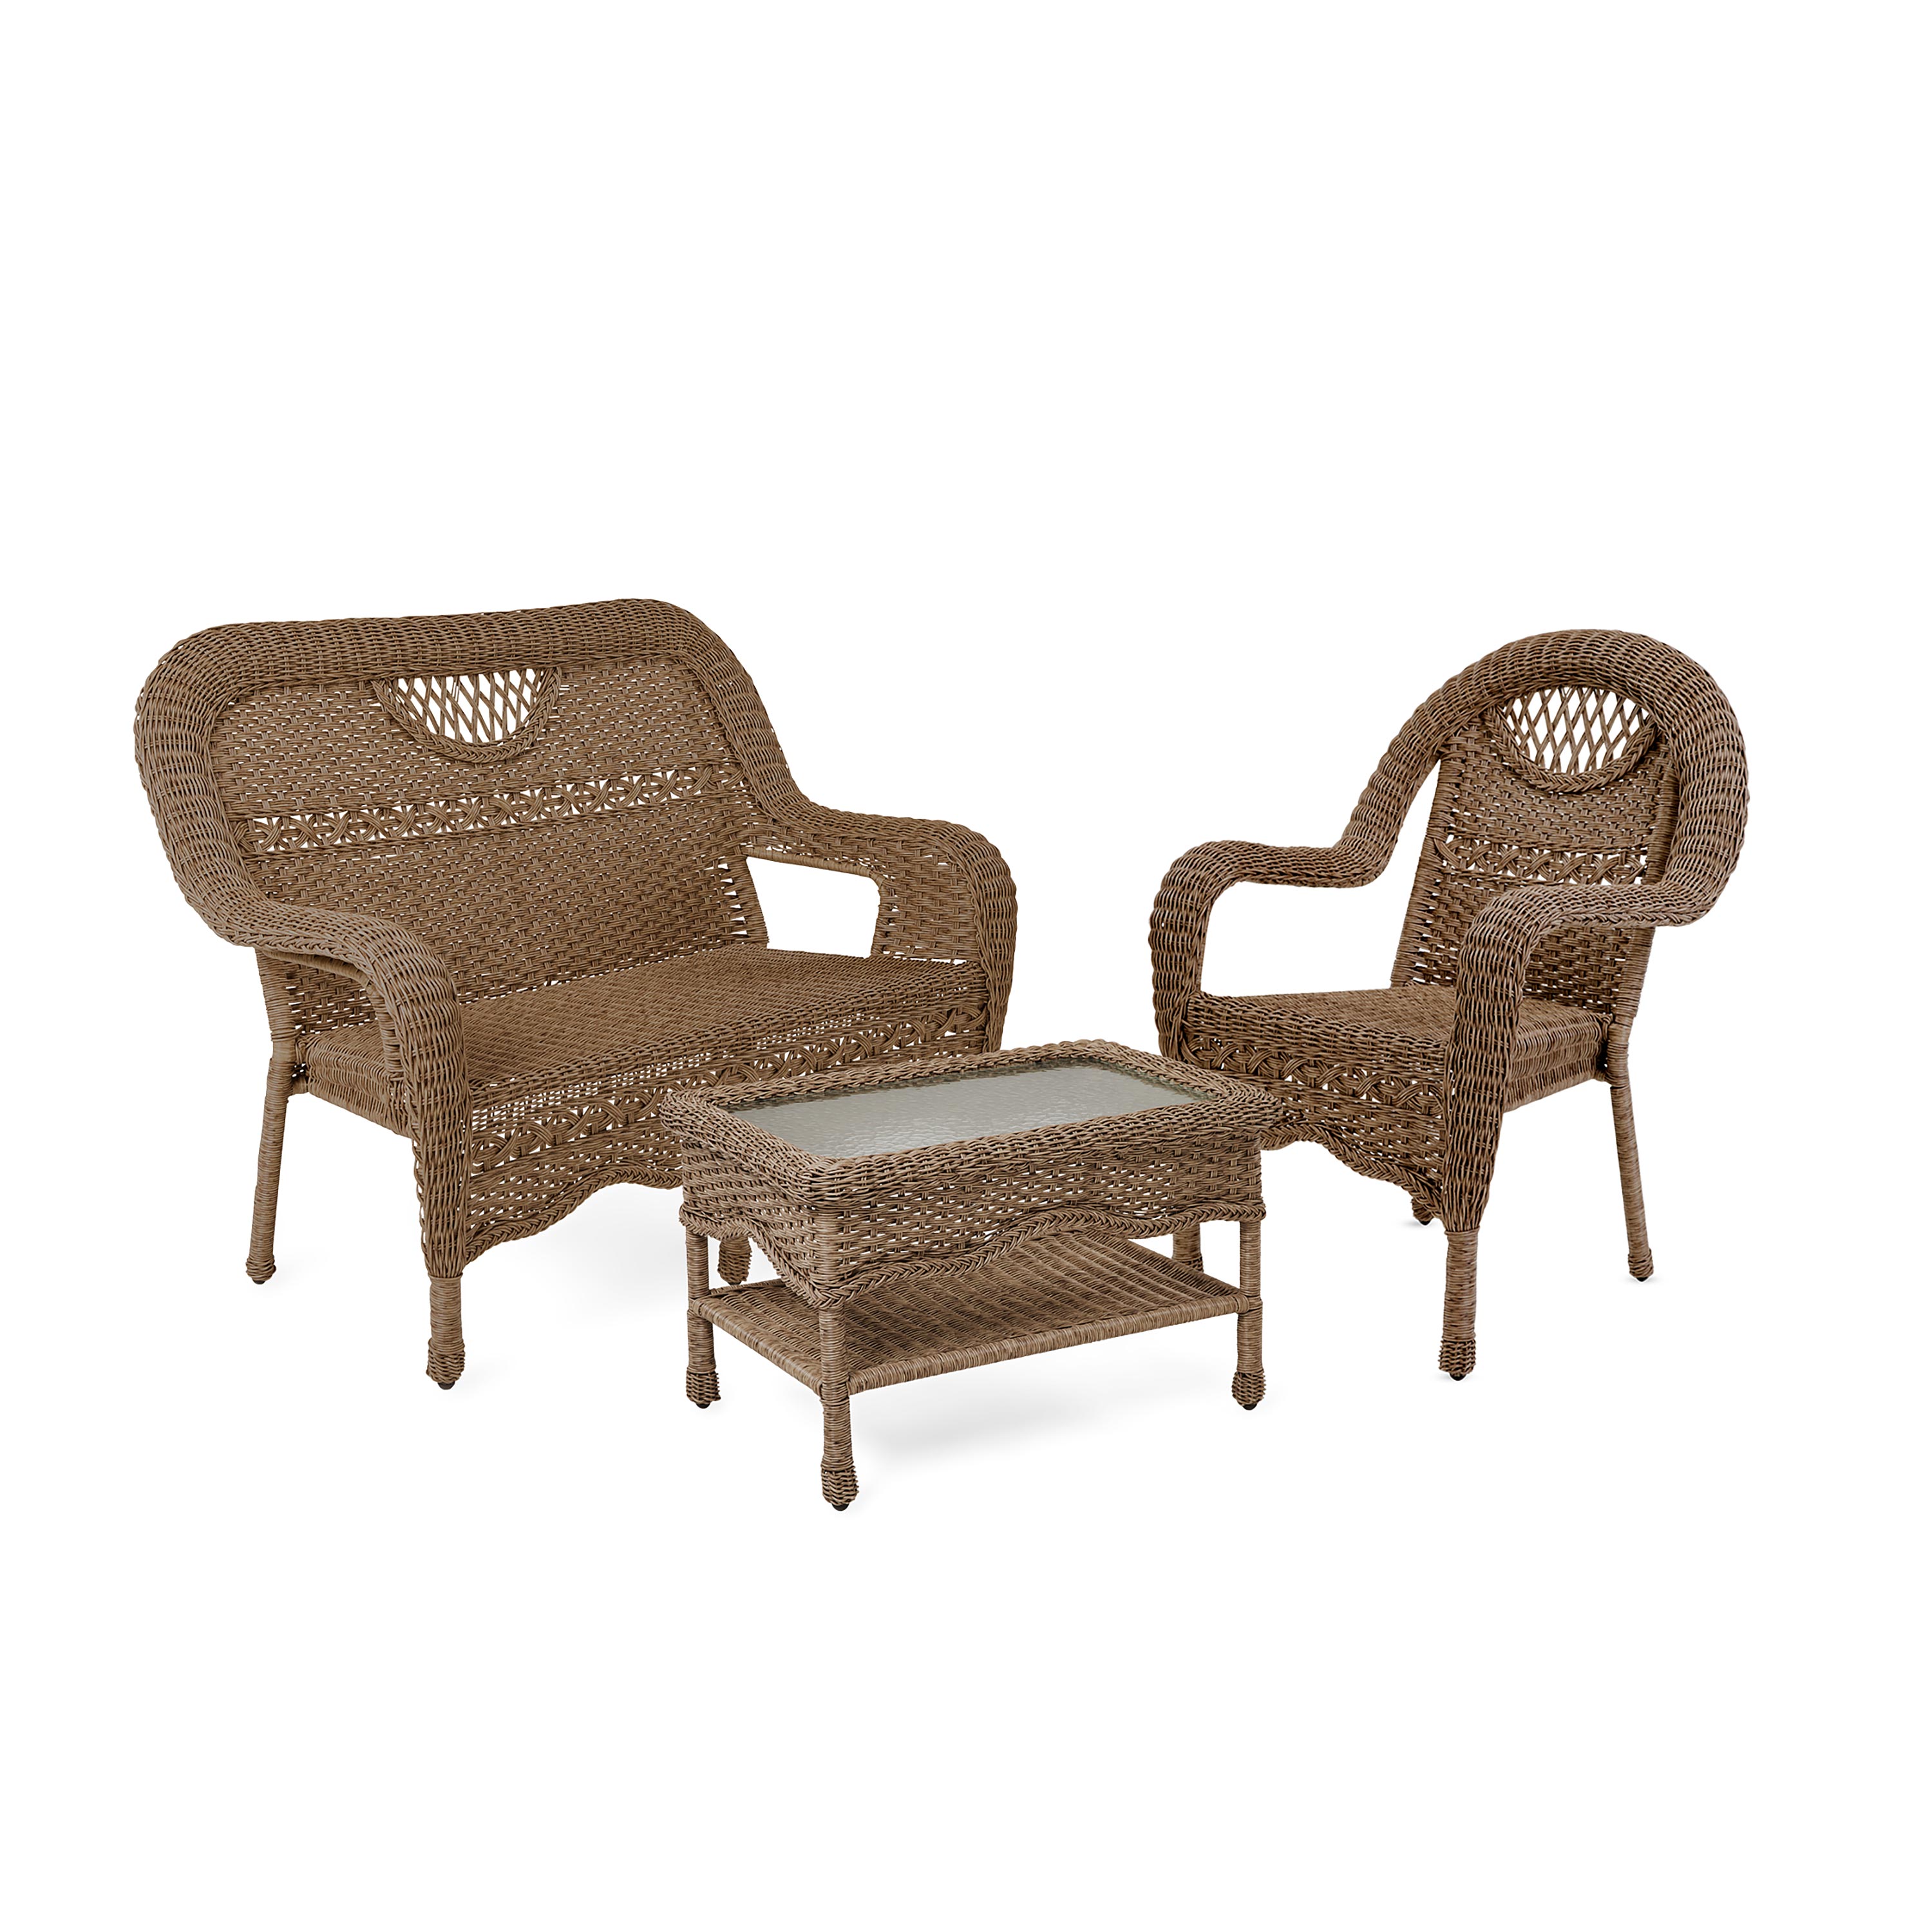 Sale! Prospect Hill Wicker Settee, Chair and Coffee Table Set